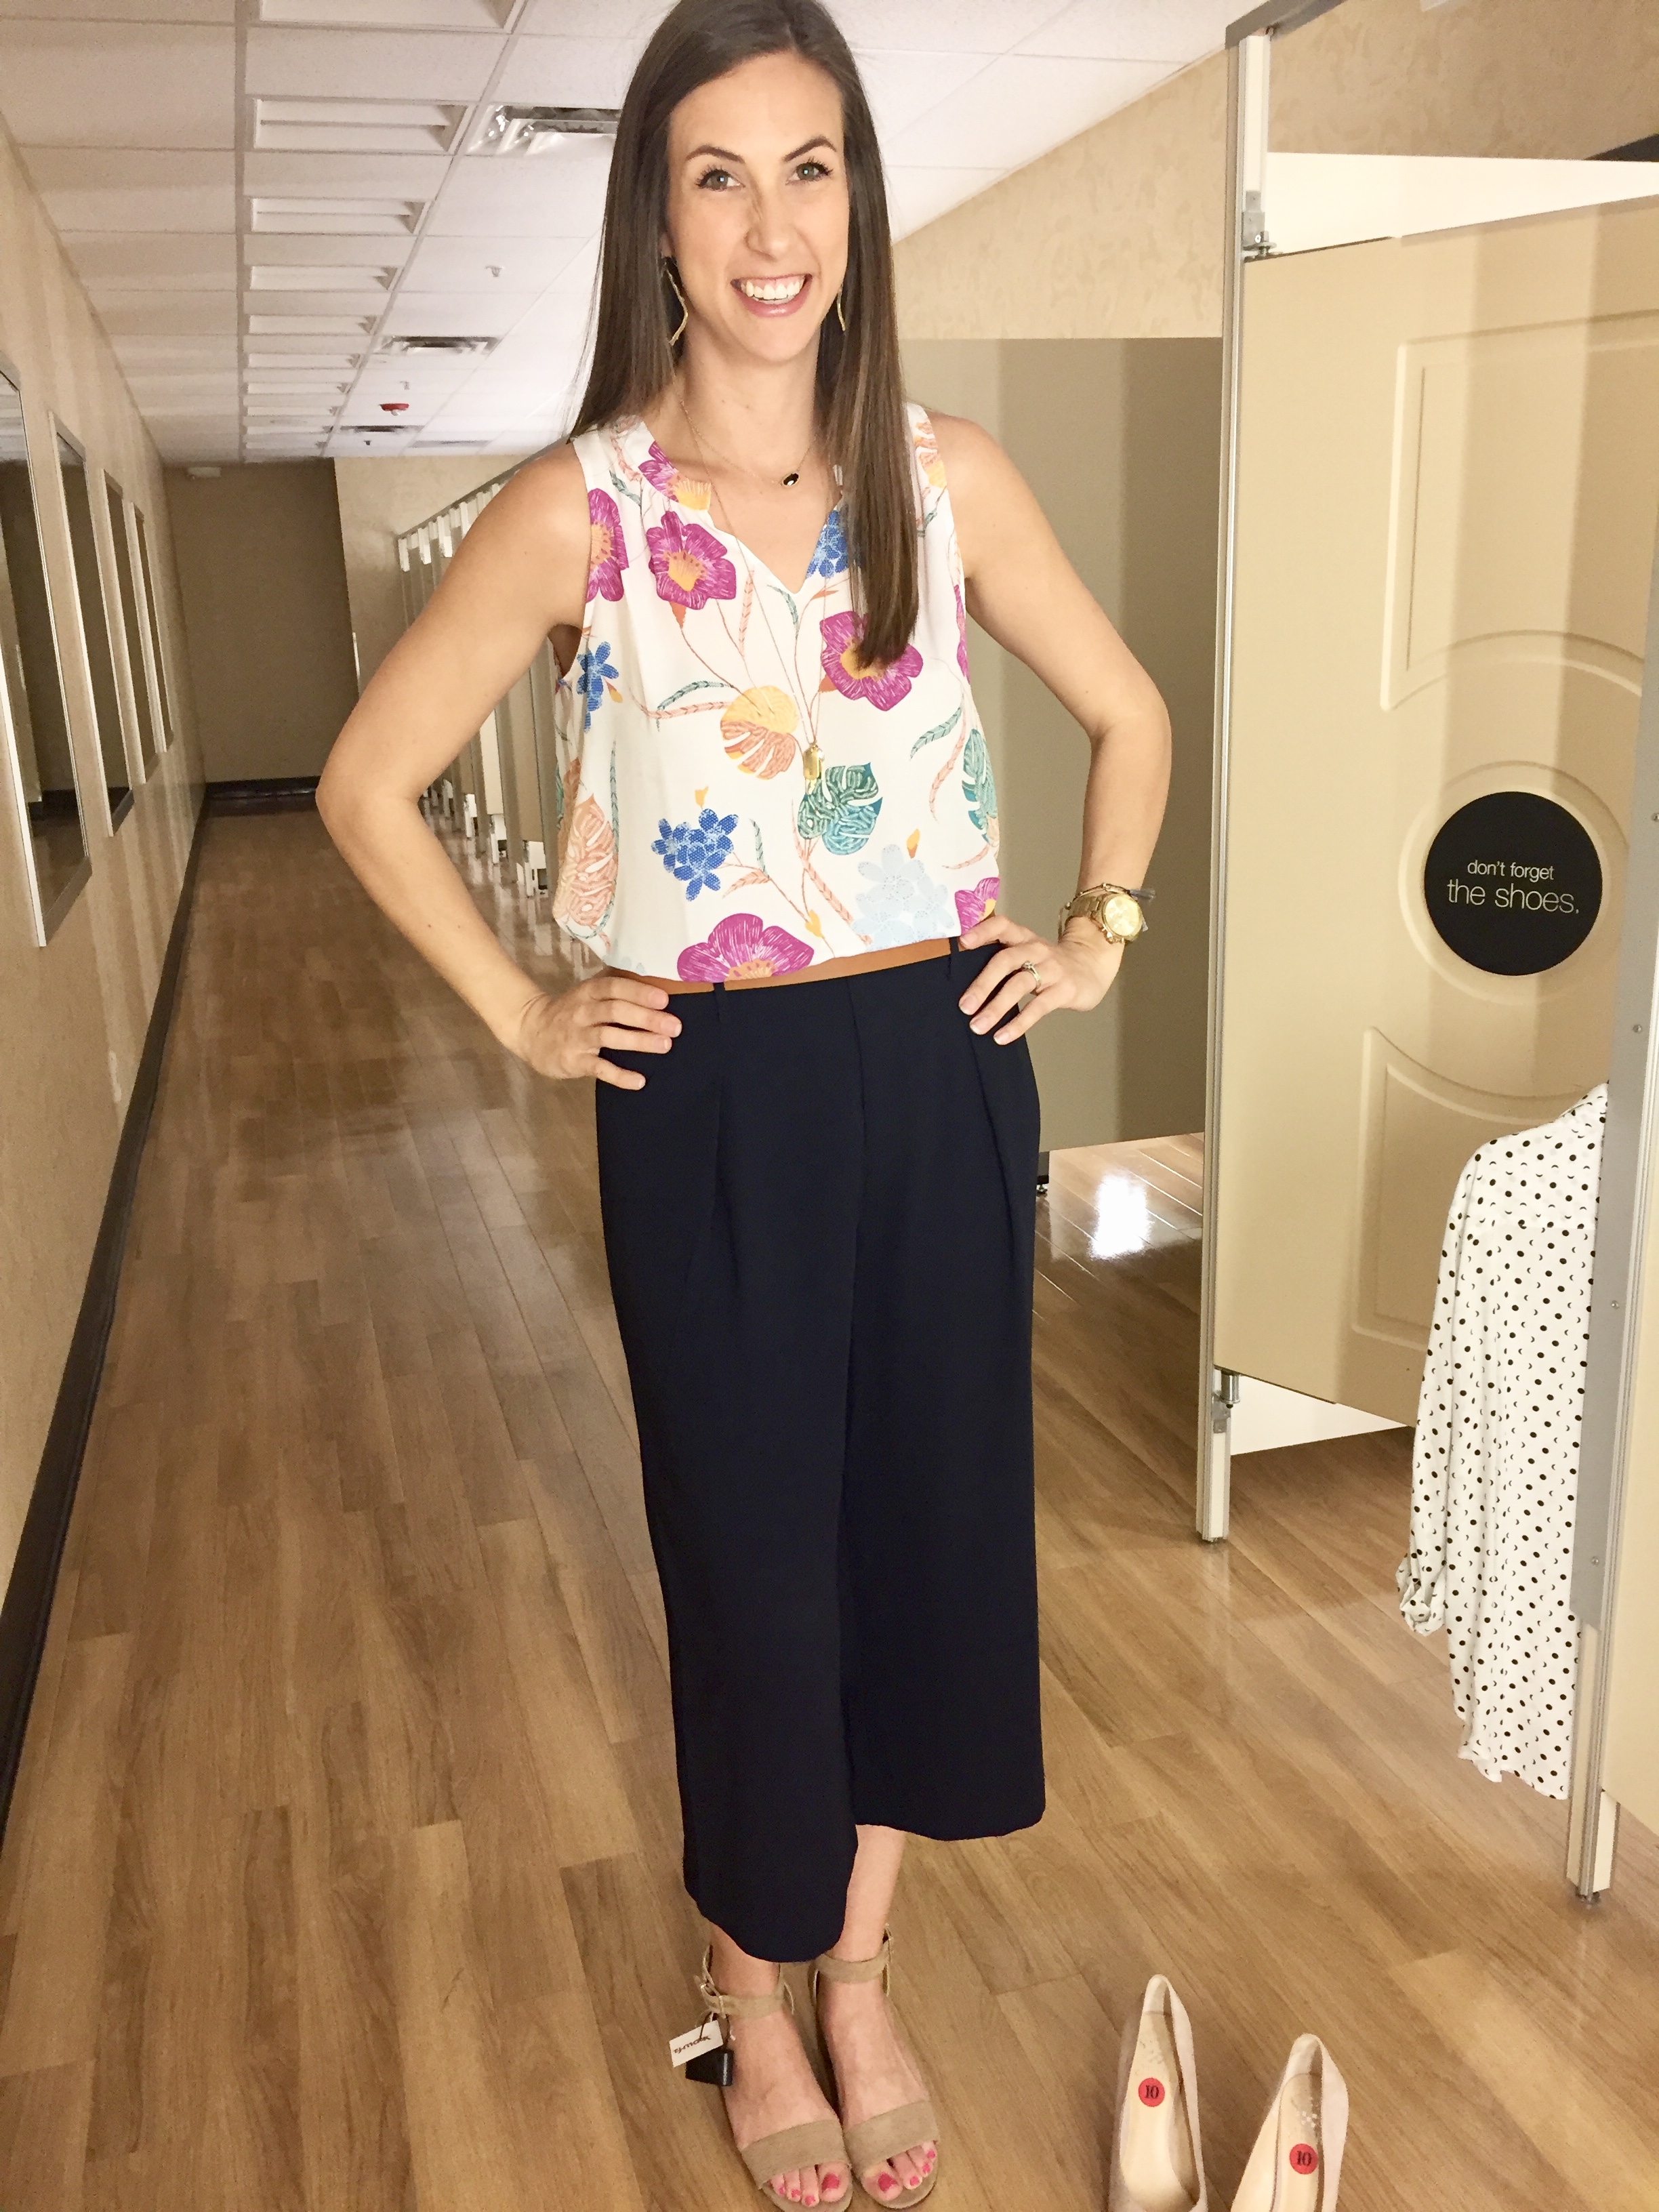 after, belted, floral tank top, style session, needs work, method39, style advice, wardrobe stylist